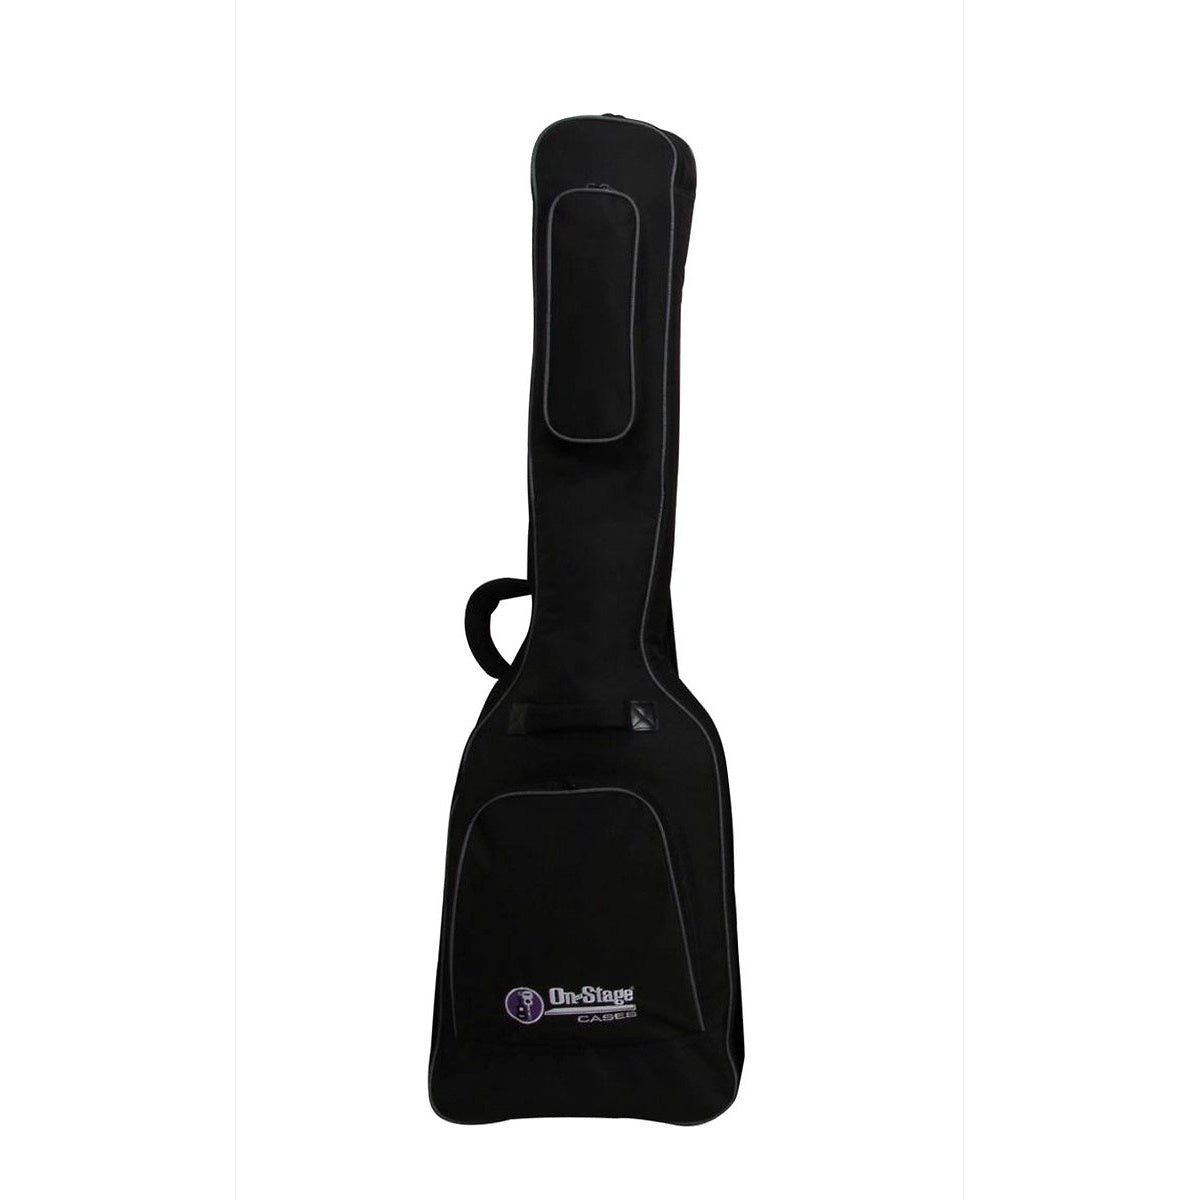 On-Stage GBB4770 Deluxe Electric Bass Gig Bag